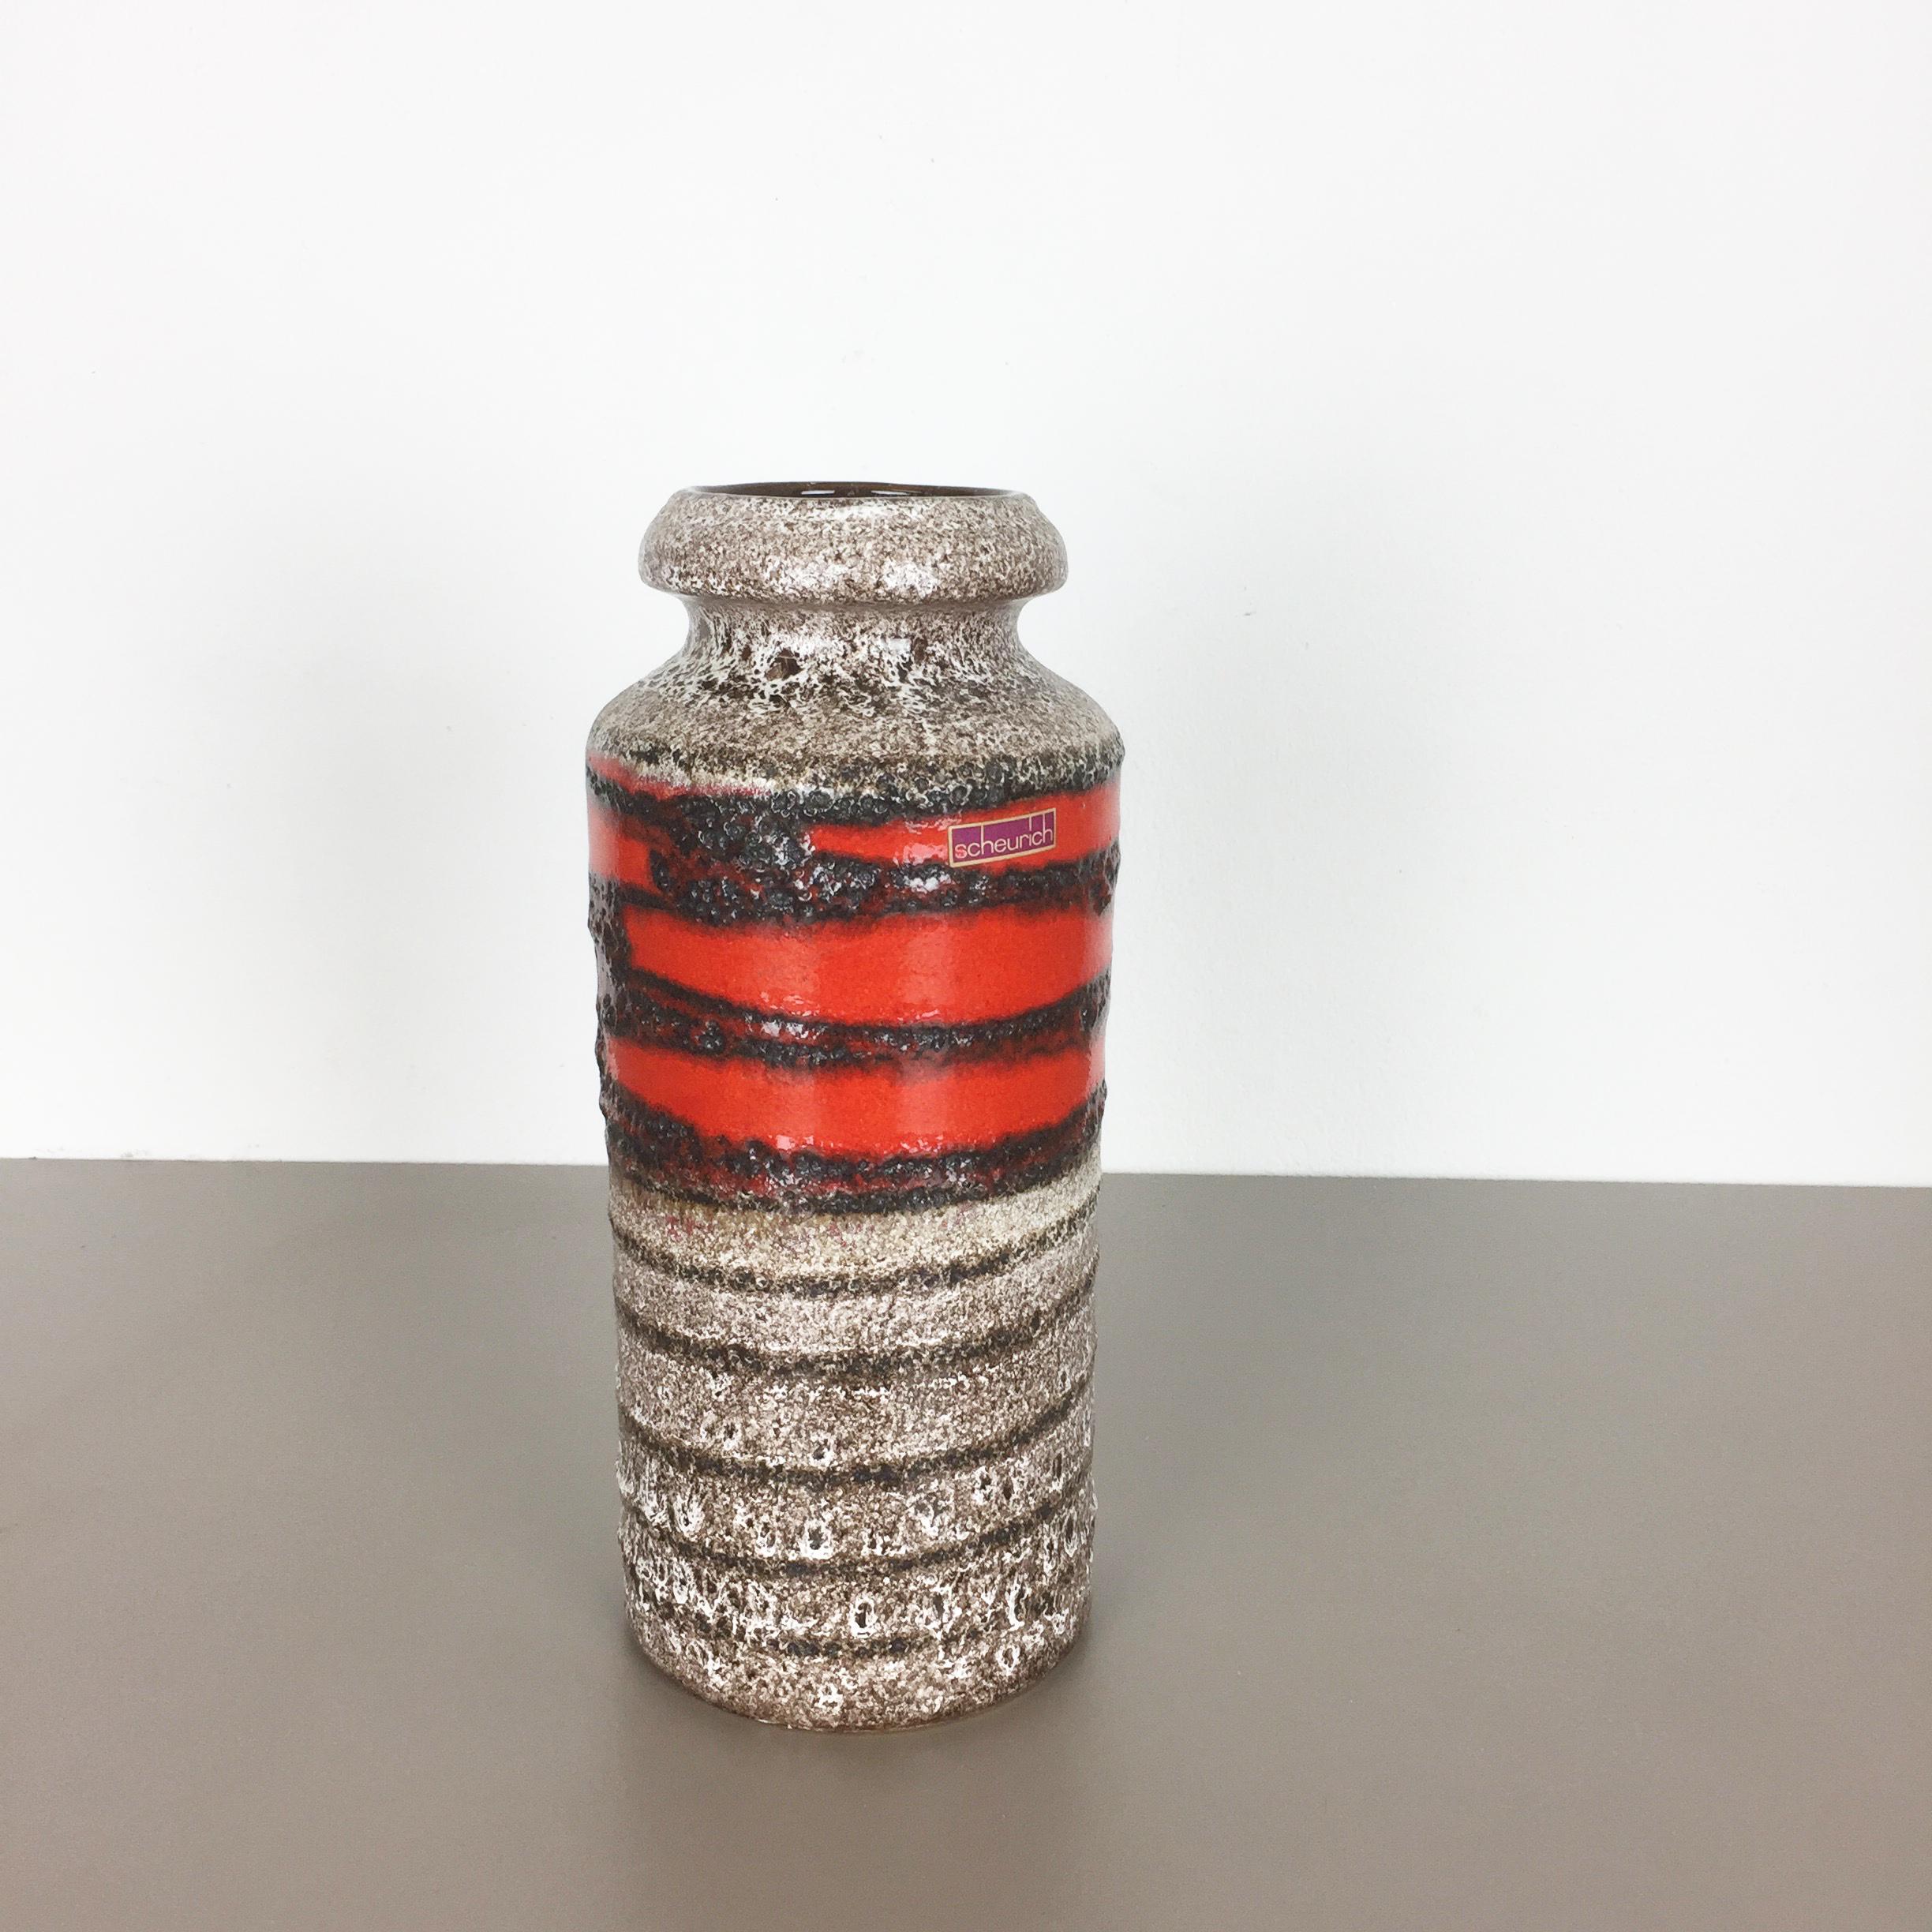 Article:

Pottery ceramic vase 

Fat lava


Producer:

Scheurich, Germany


Decade:

1960s


Origin:

Germany



Description:

Original vintage 1960s pottery ceramic vase in Germany. High quality German production with a